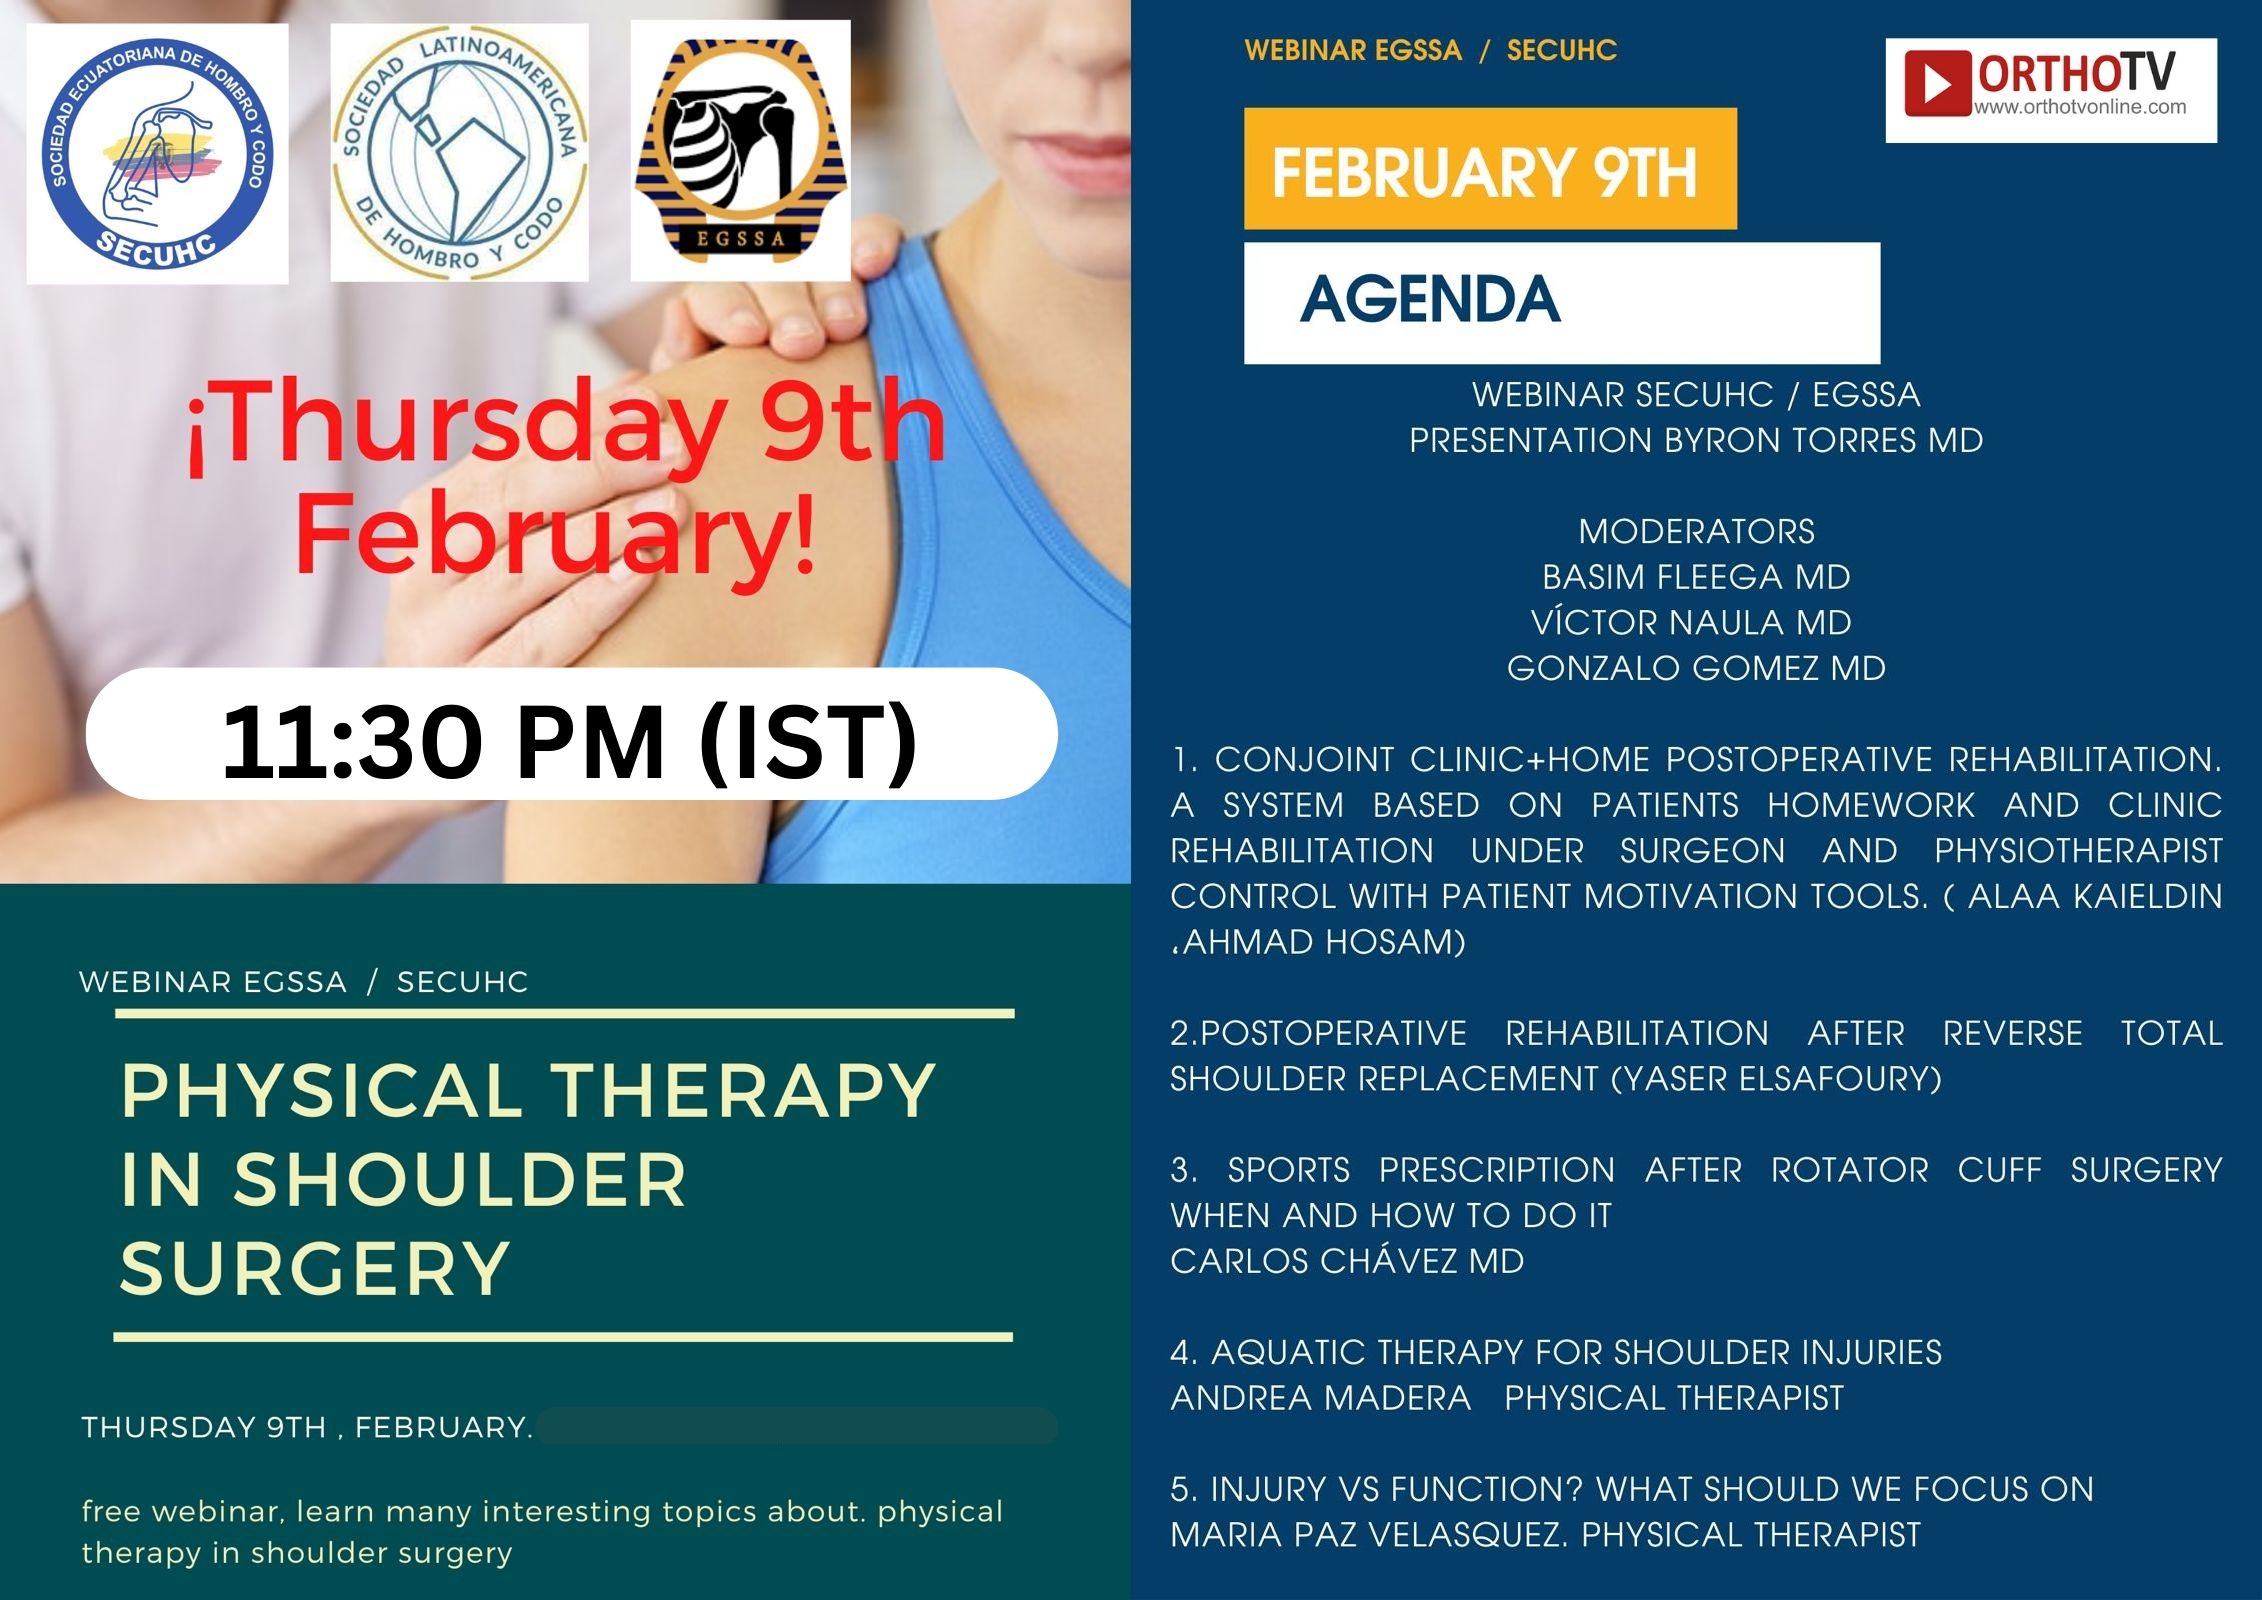 WEBINAR EGSSA / SECUHC - PHYSICAL THERAPY IN SHOULDER SURGERY